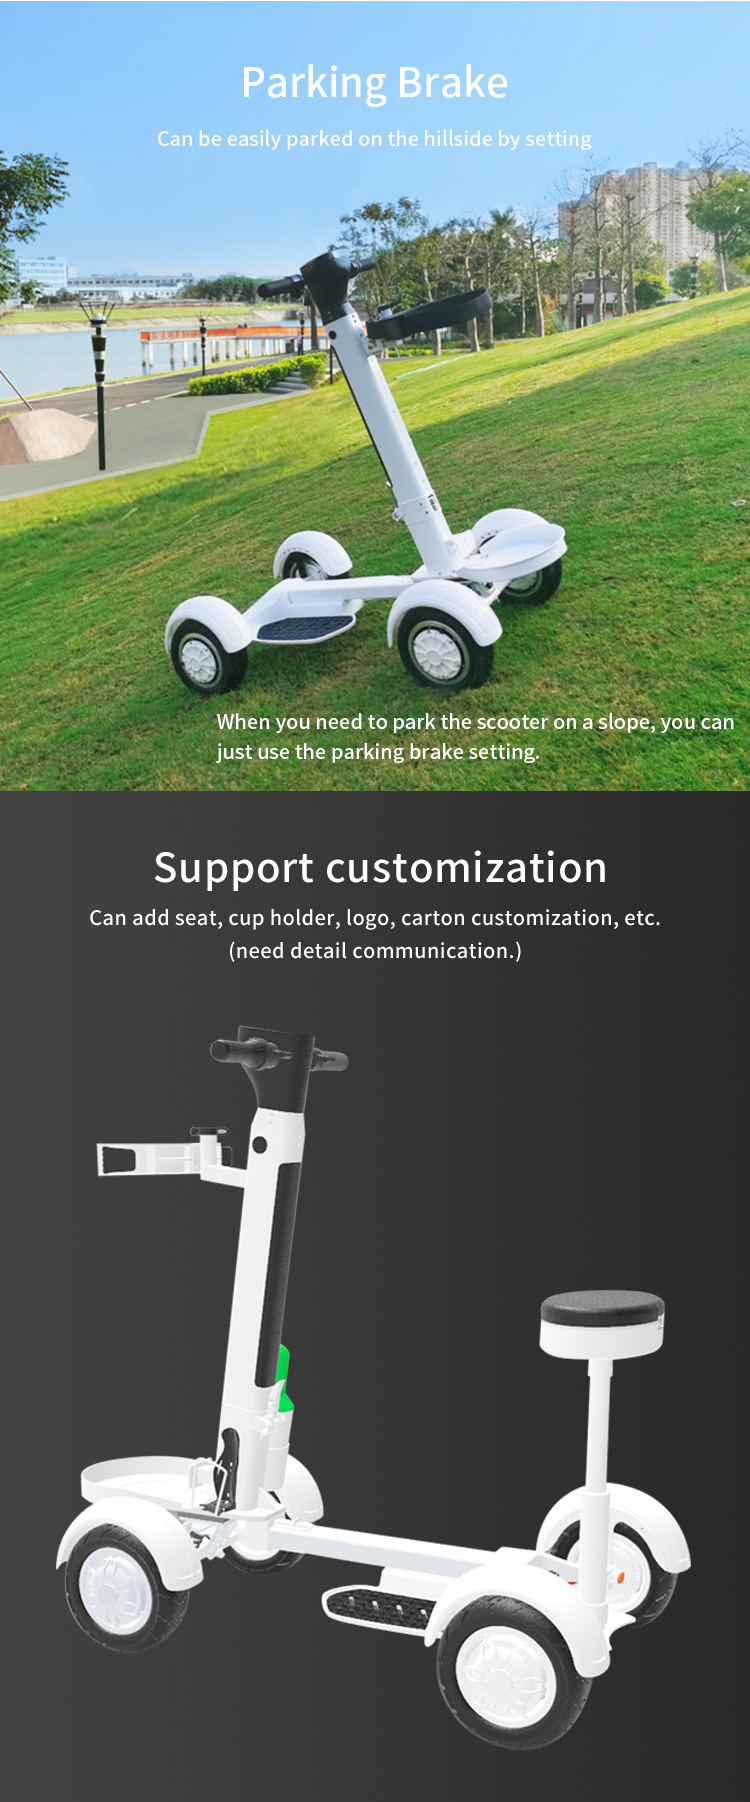 Dual Motor High Power 2000W Electric Scooter folding Golf Sharing 4 wheels Electric Golf Cart Scooter